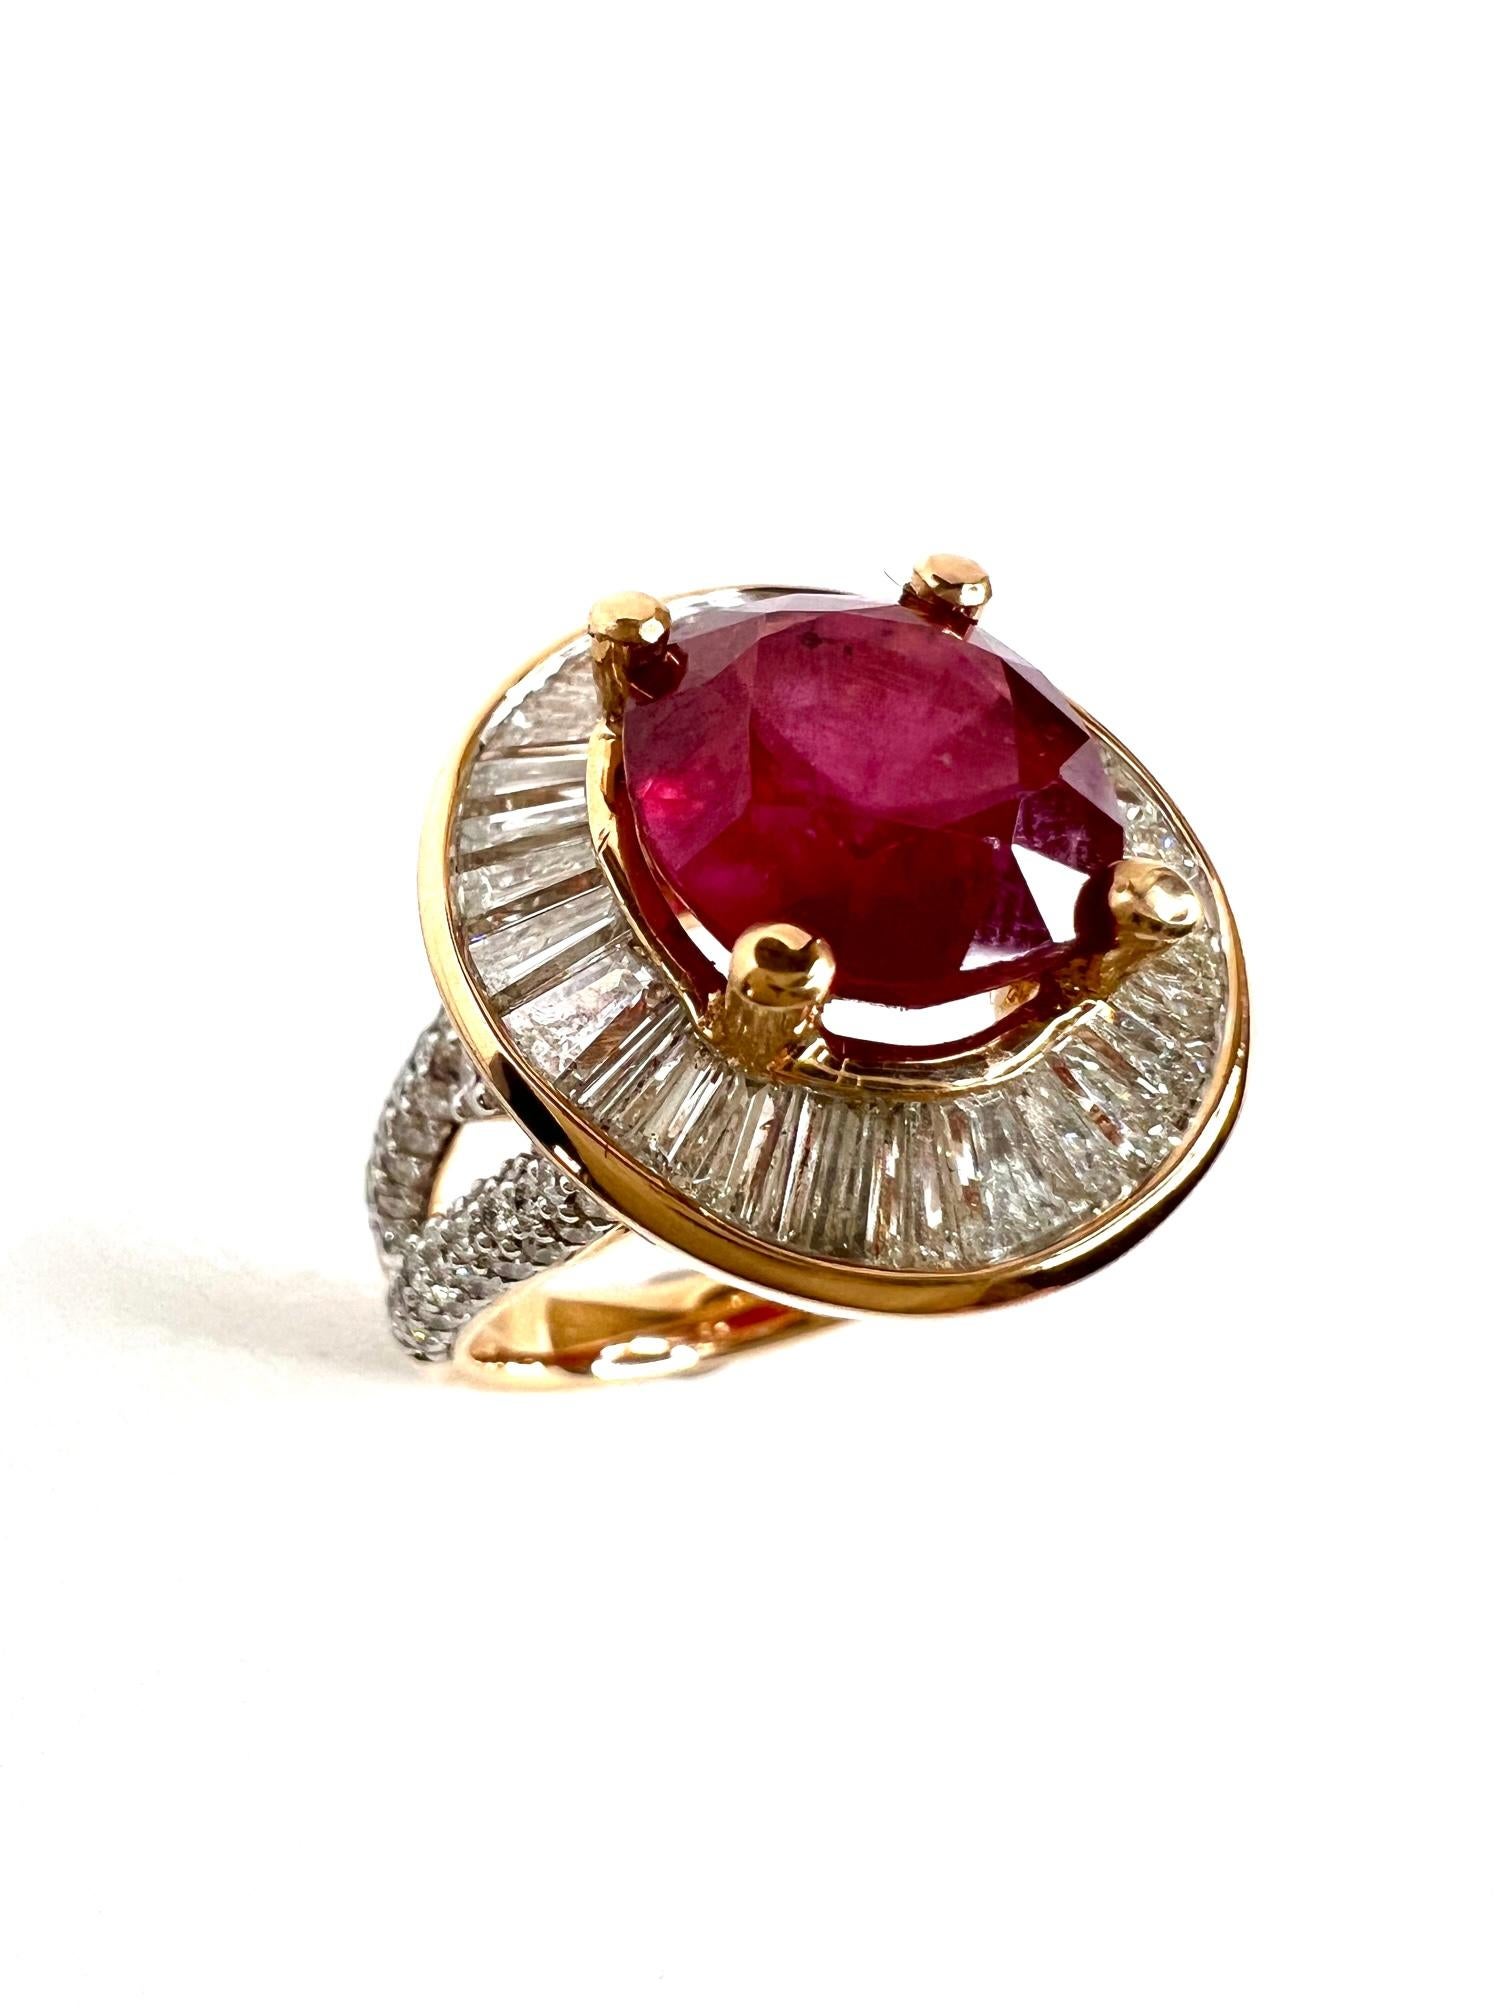 Thomas Leyser is renowned for his contemporary jewellery designs utilizing fine gemstones.

Ring in 18K Red Gold (11gr.) with 1x Ruby (facetted, oval, 11,2x9,9mm, 7,25cts. clarity improved) + Diamonds (tapez-cut, 1,89cts. I/VS-SI) + Diamonds